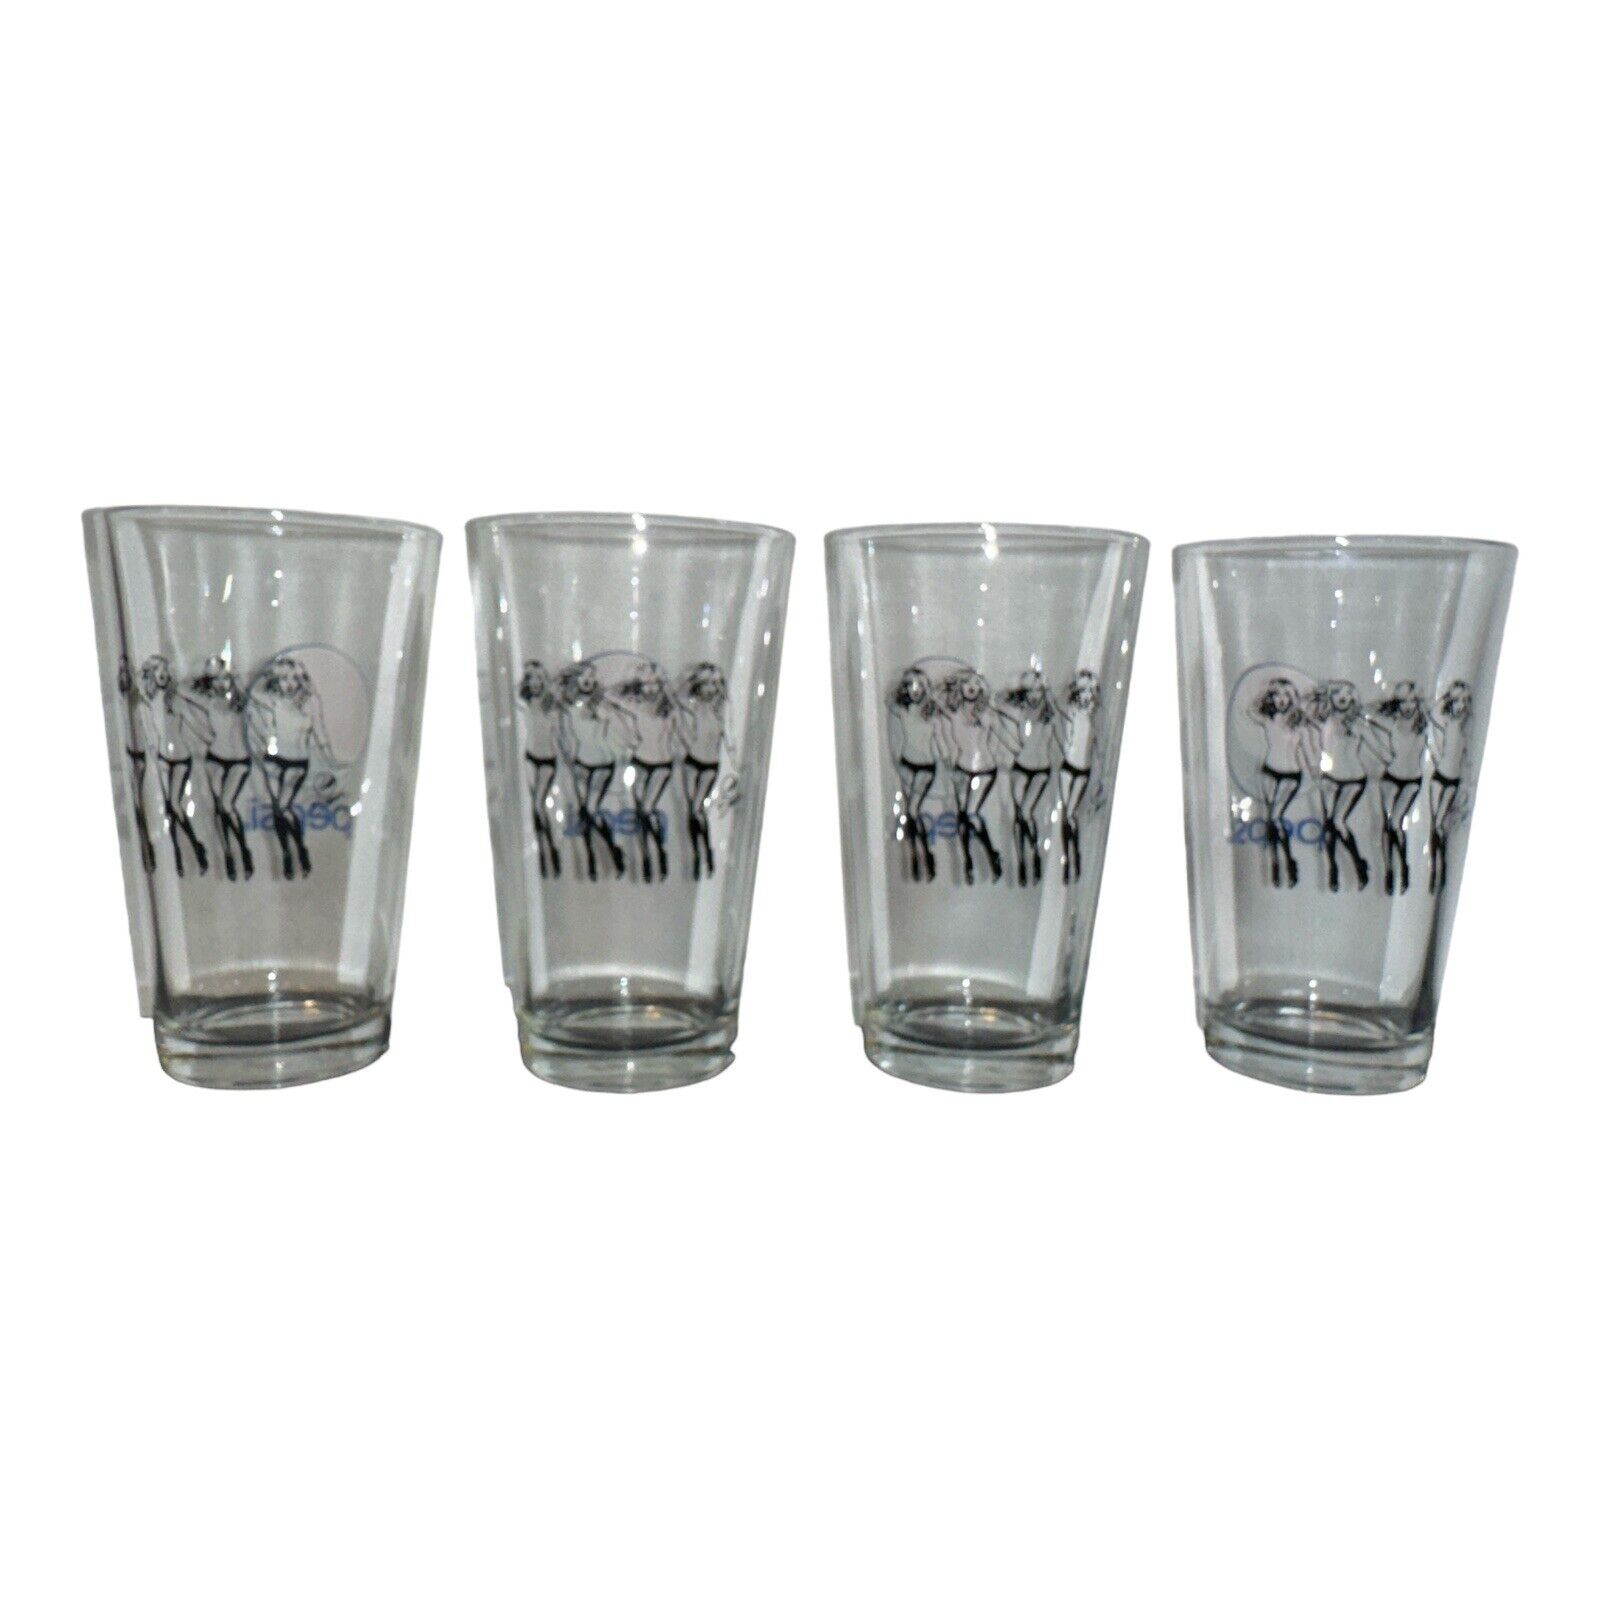 (4)Pepsi Beyonce Pint Glasses Limited Edition with Beyonce Images and Pepsi Logo